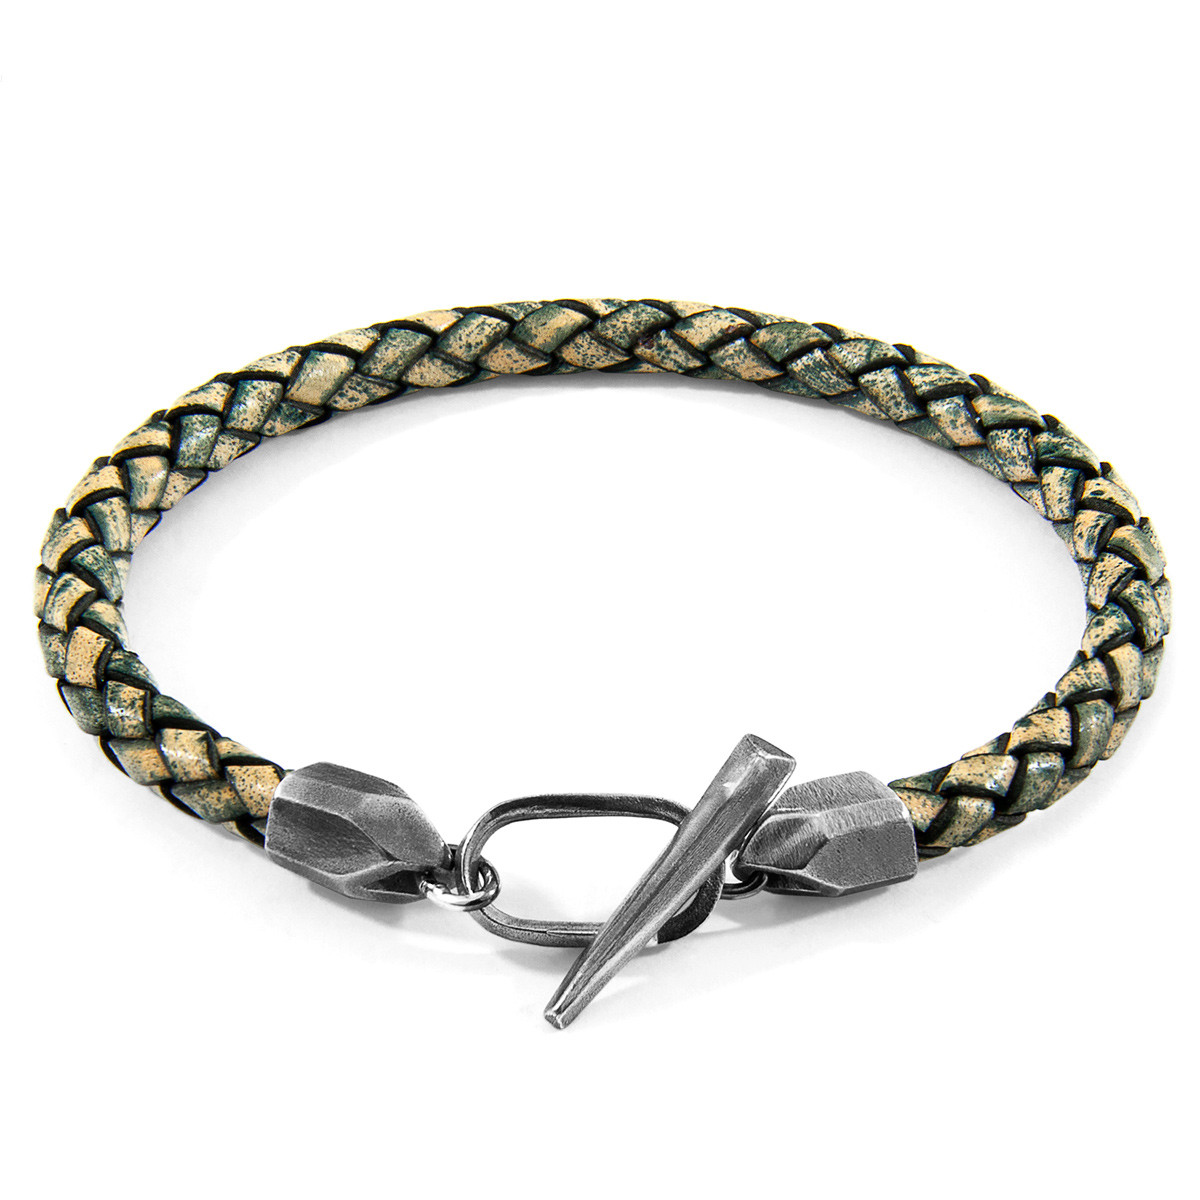 Anchor & Crew Petrol Green Jura Silver and Braided Leather Bracelet